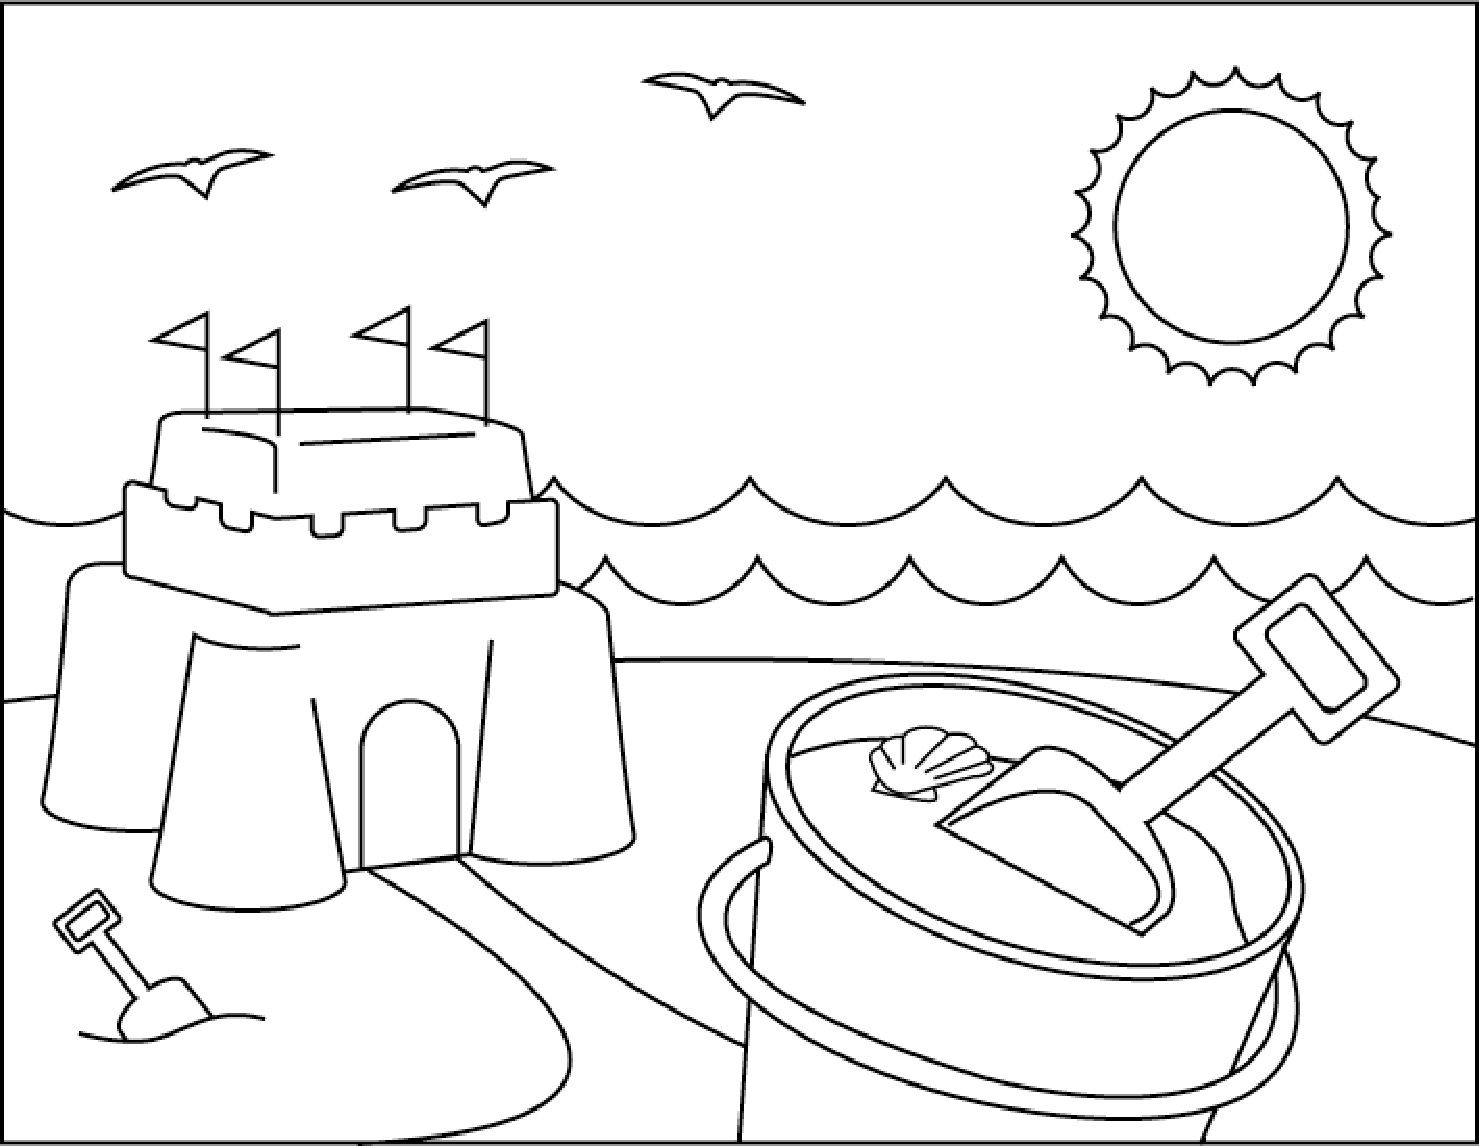 Coloring Pages : Free Printable Summer Coloringnumber Sheets - Free Printable Summer Coloring Pages